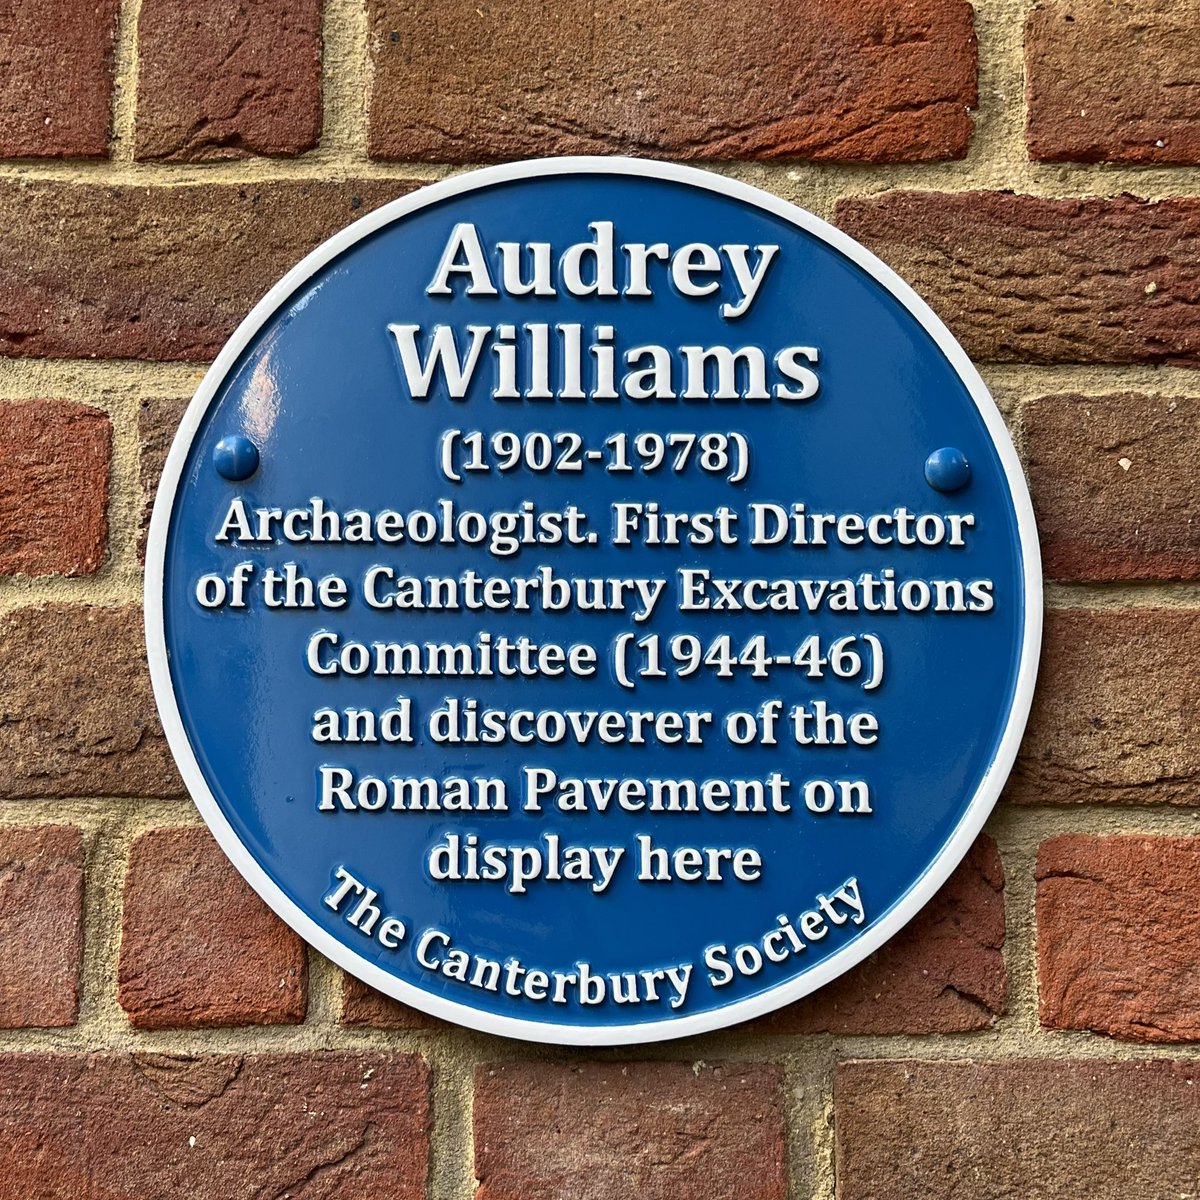 💙 We’re so happy to see Audrey Williams’ blue plaque go up today on #InternationalWomensDay! Audrey Williams (1902-1978) led the first excavation of the Roman house now preserved at the museum. […]